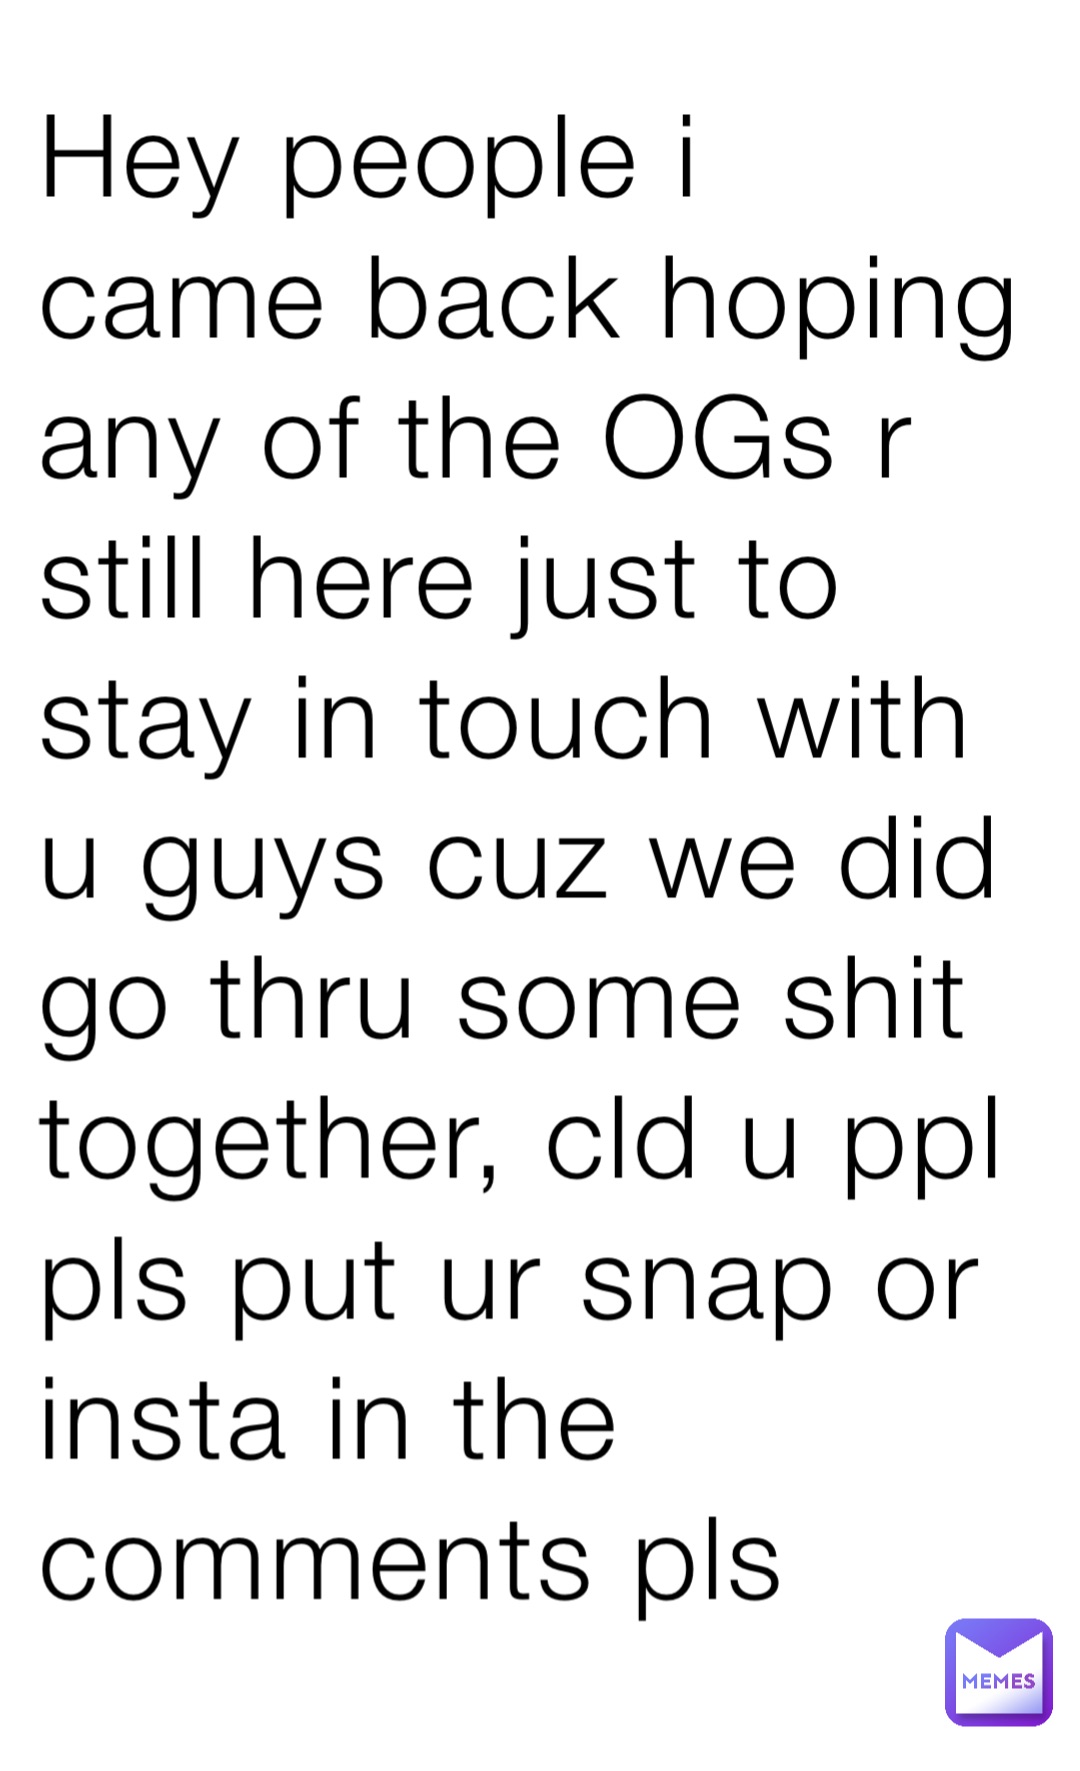 Hey people i came back hoping any of the OGs r still here just to stay in touch with u guys cuz we did go thru some shit together, cld u ppl pls put ur snap or insta in the comments pls